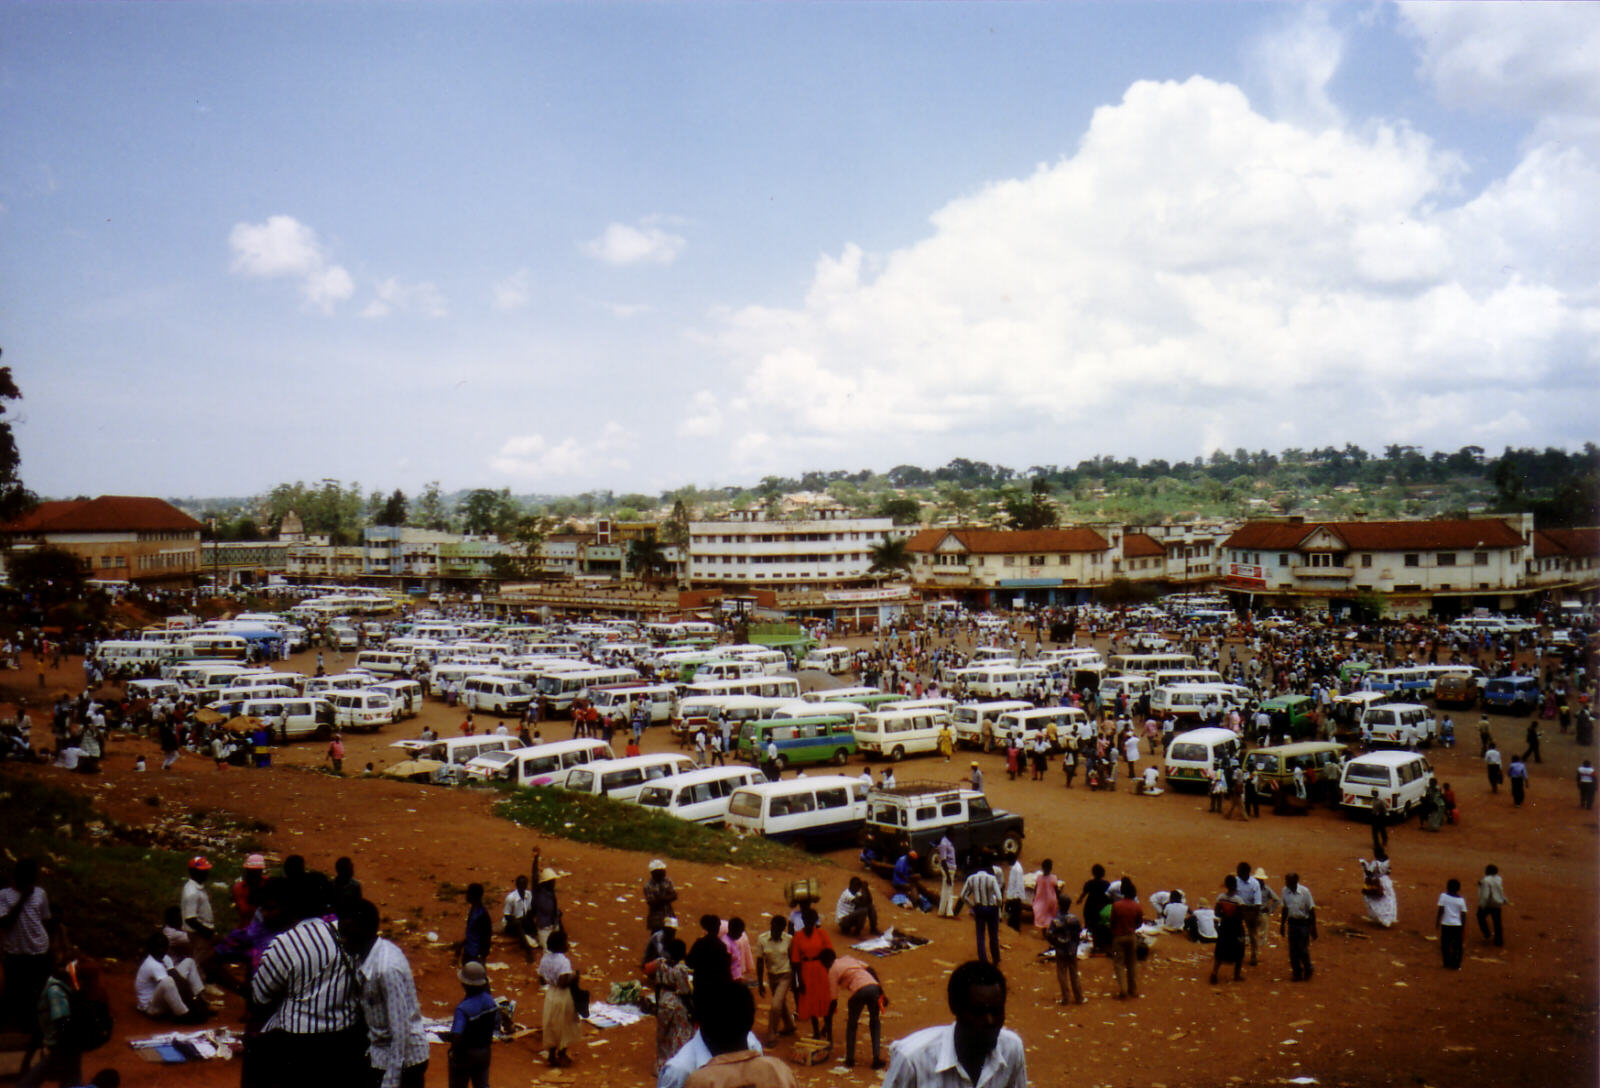 The very confusing bus station in Kampala, Uganda